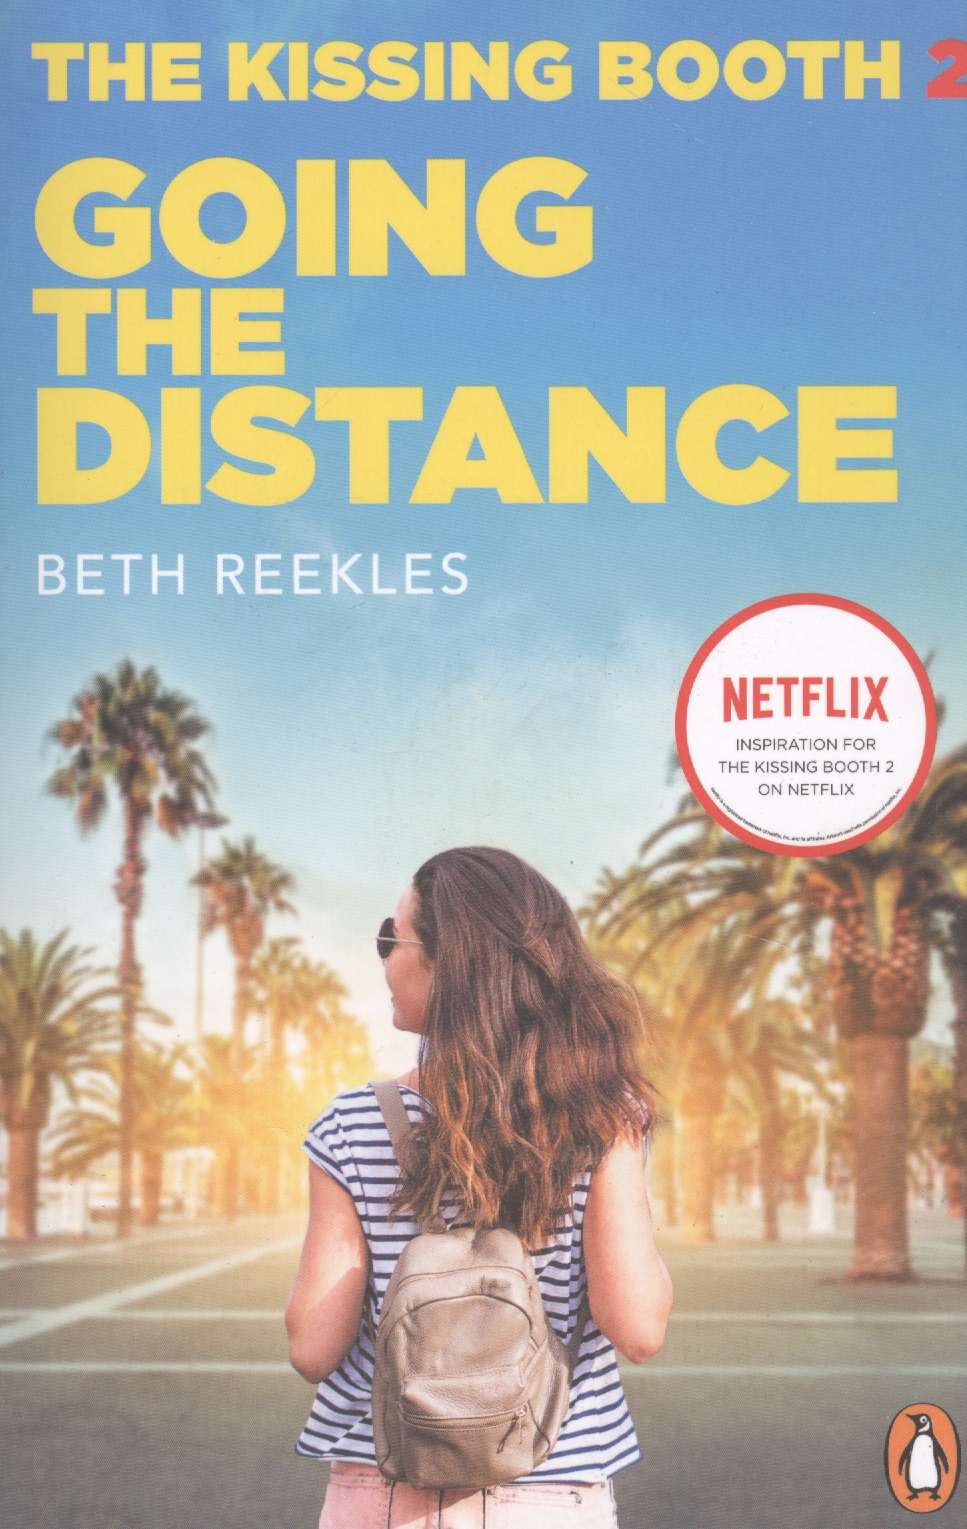 Reekles Beth The Kissing Booth 2: Going the Distance reekles b the beach house a kissing booth story